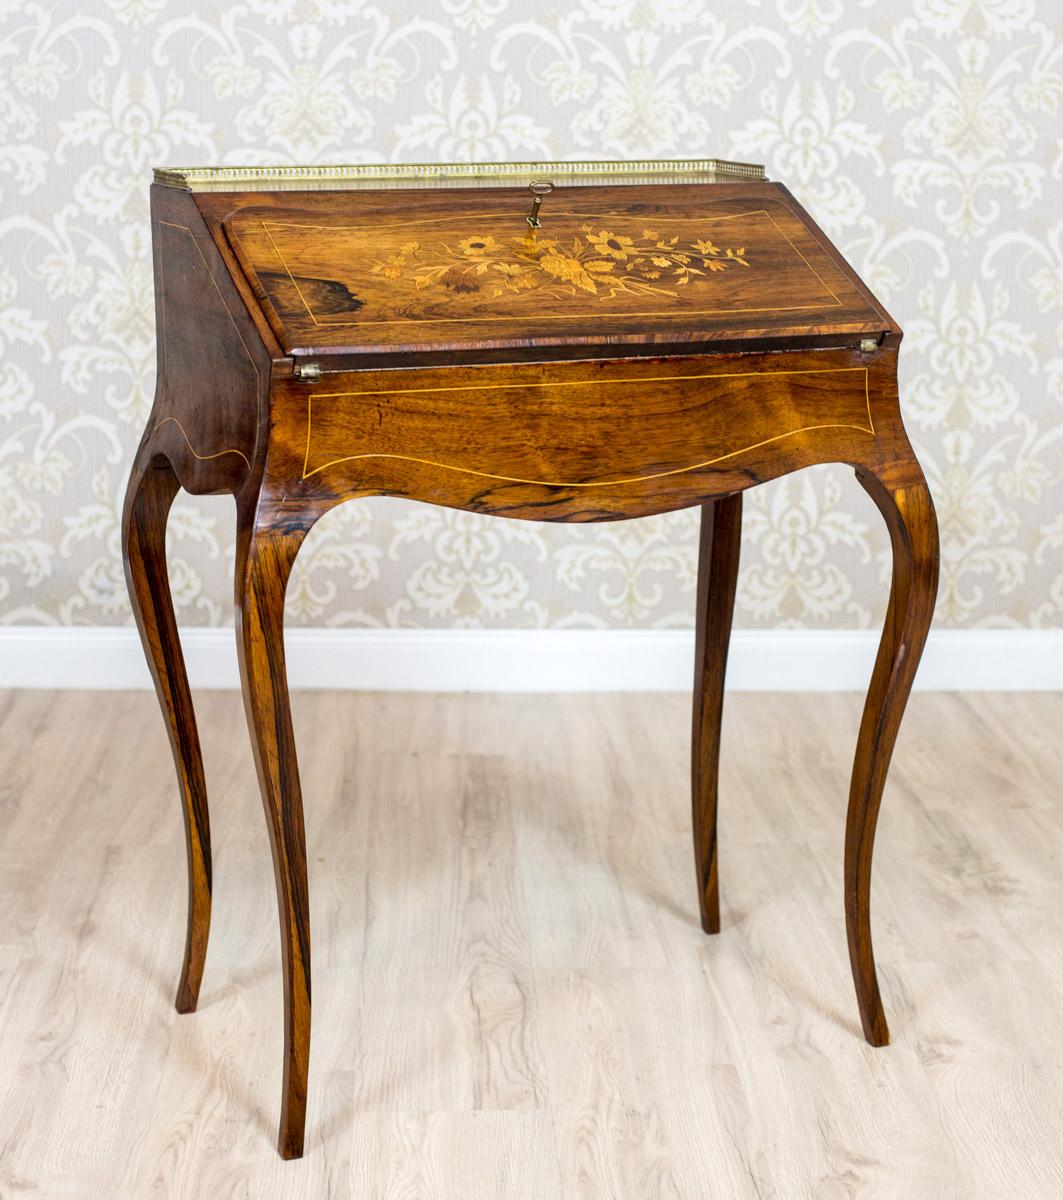 A piece of furniture, circa 1920-1930, of oaken framework in rosewood veneer.
The apron with adjustable desktop, supported on neat, bentwood legs.
The sides and the front are decorated with filet stripes. The desktop is intarsiated with a floral